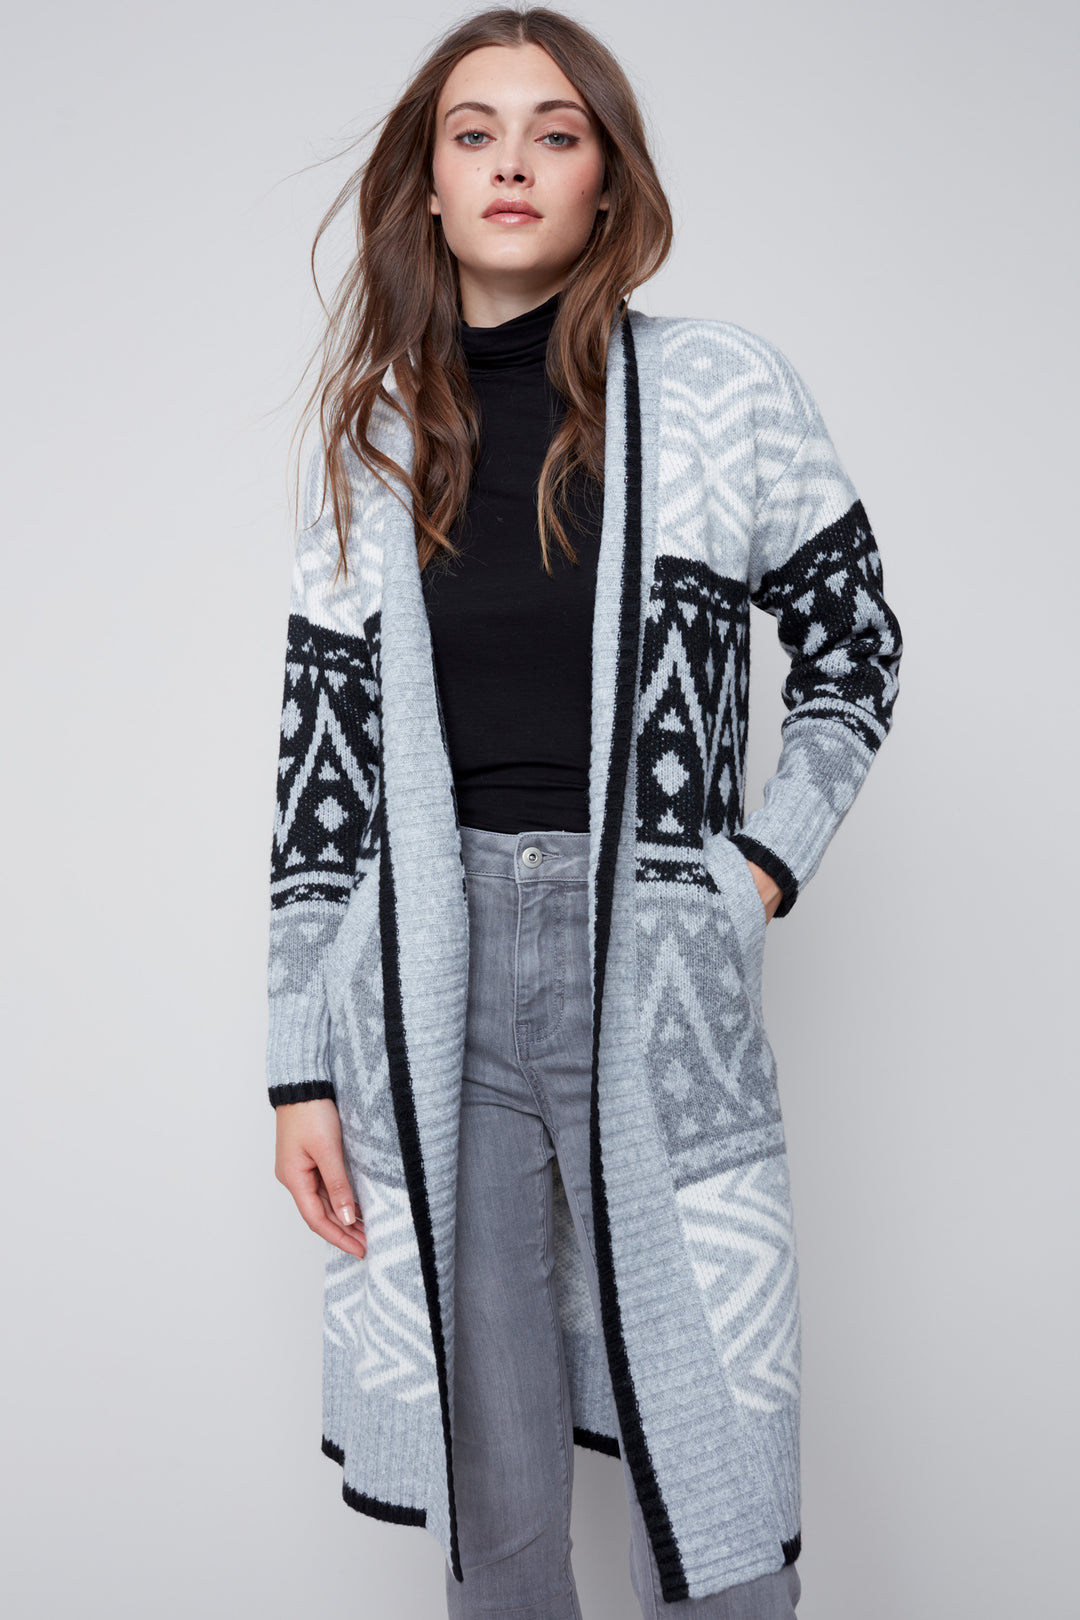 Take your style to a whole new level with this long jacquard cardigan adorned with an intricate geometric design. Its stunning aztec pattern says fall and winter, while its pockets make it as functional as it is fashionable. 